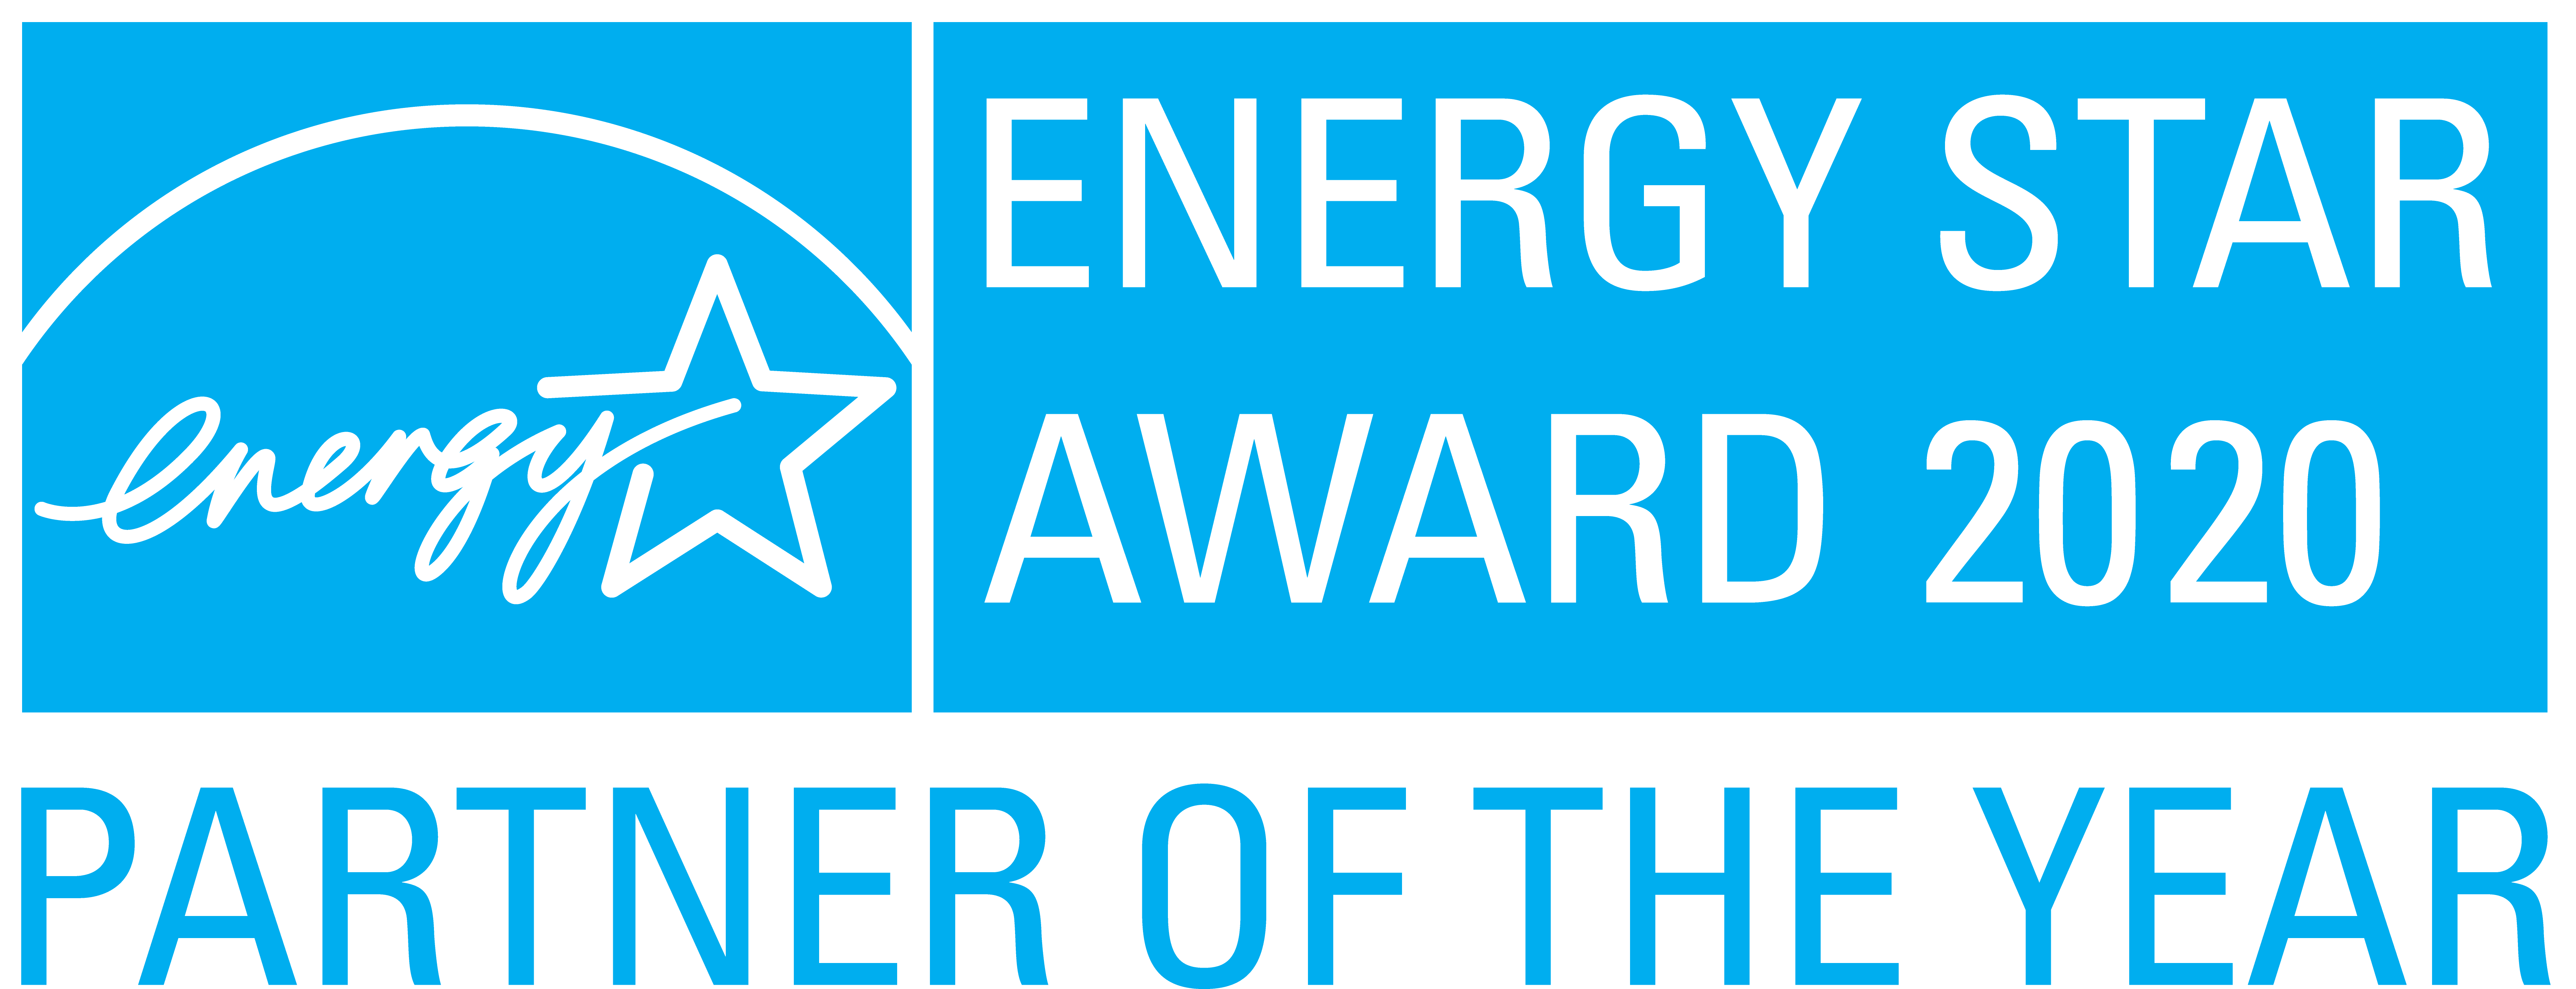 ENERGY STAR Partner of the Year 2020